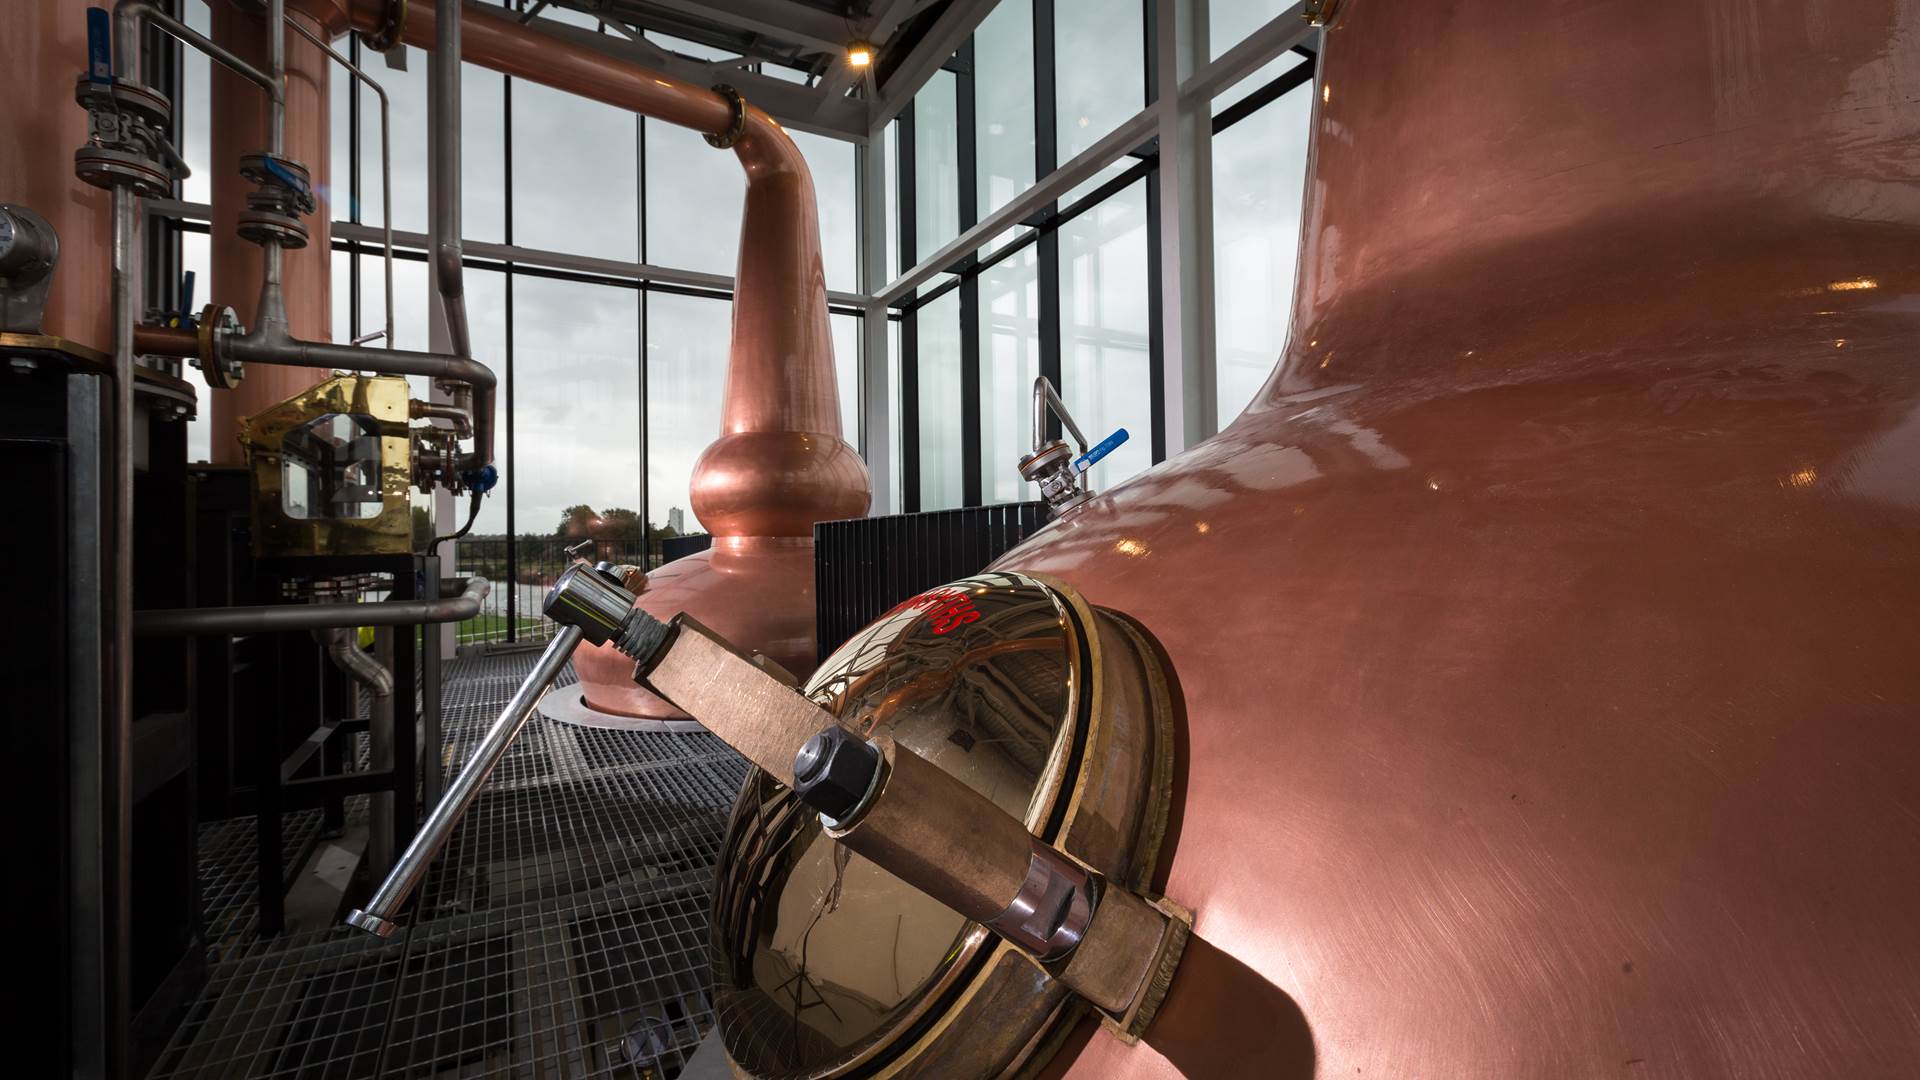 The Clydeside Distillery’s glass Still House with two tall copper stills